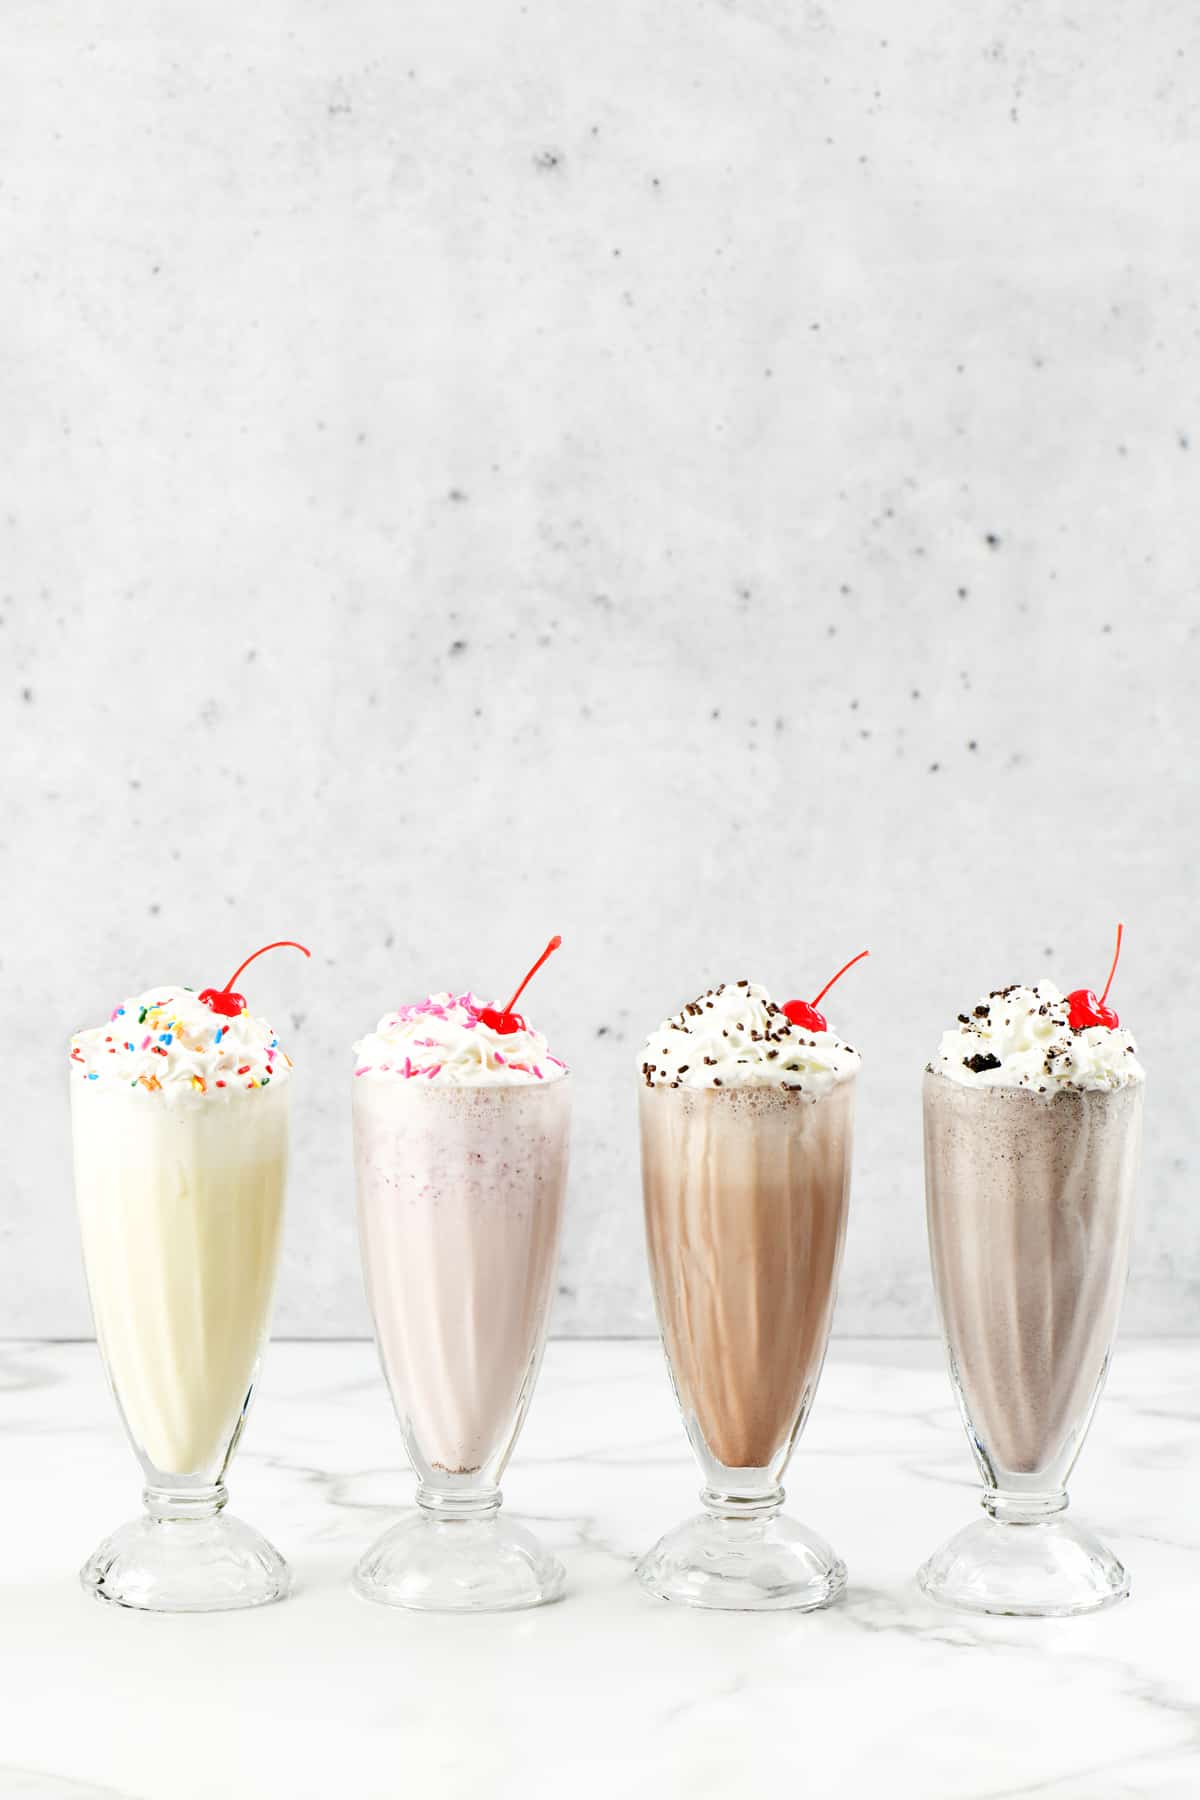 shakes lined up in a row.